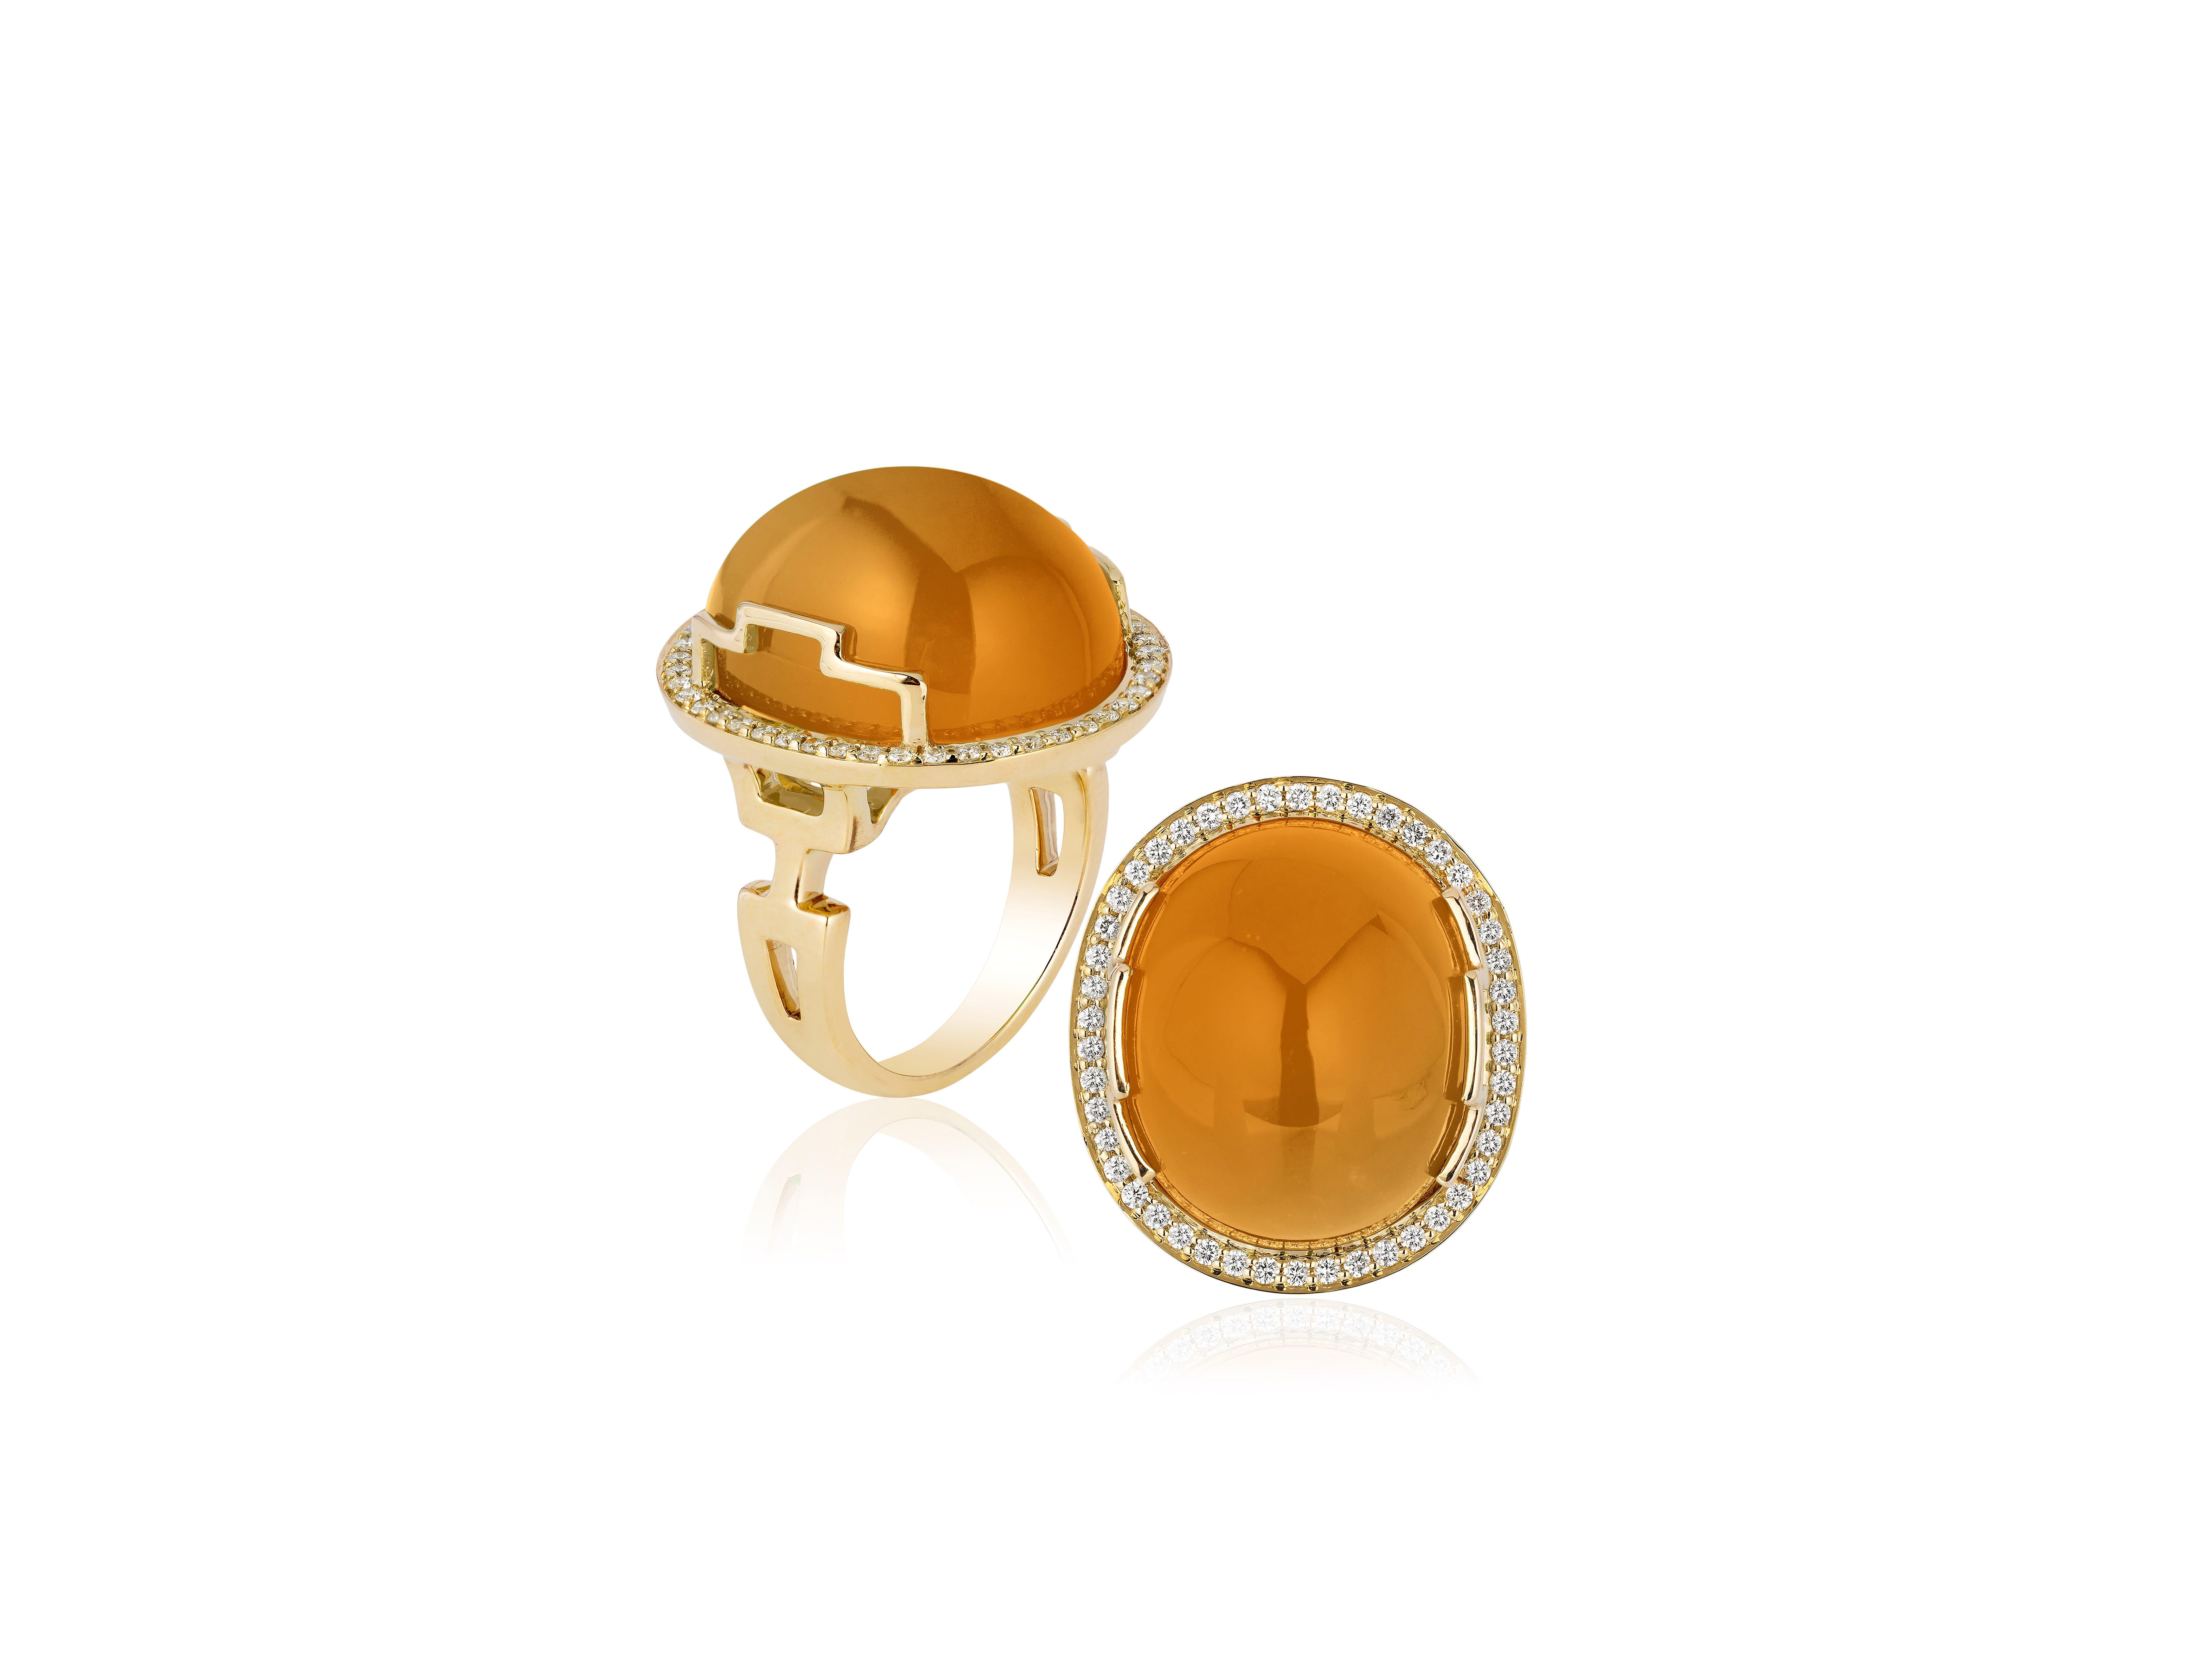 Citrine Oval Cabochon Ring in 18K Yellow Gold, from 'Rock N Roll' Collection 
 Stone Size: 20 x 17 mm
 Gemstone Approx. Wt: Citrine- 35 Carats
 Diamonds: G-H / VS, Approx. Wt: 0.31 Carats